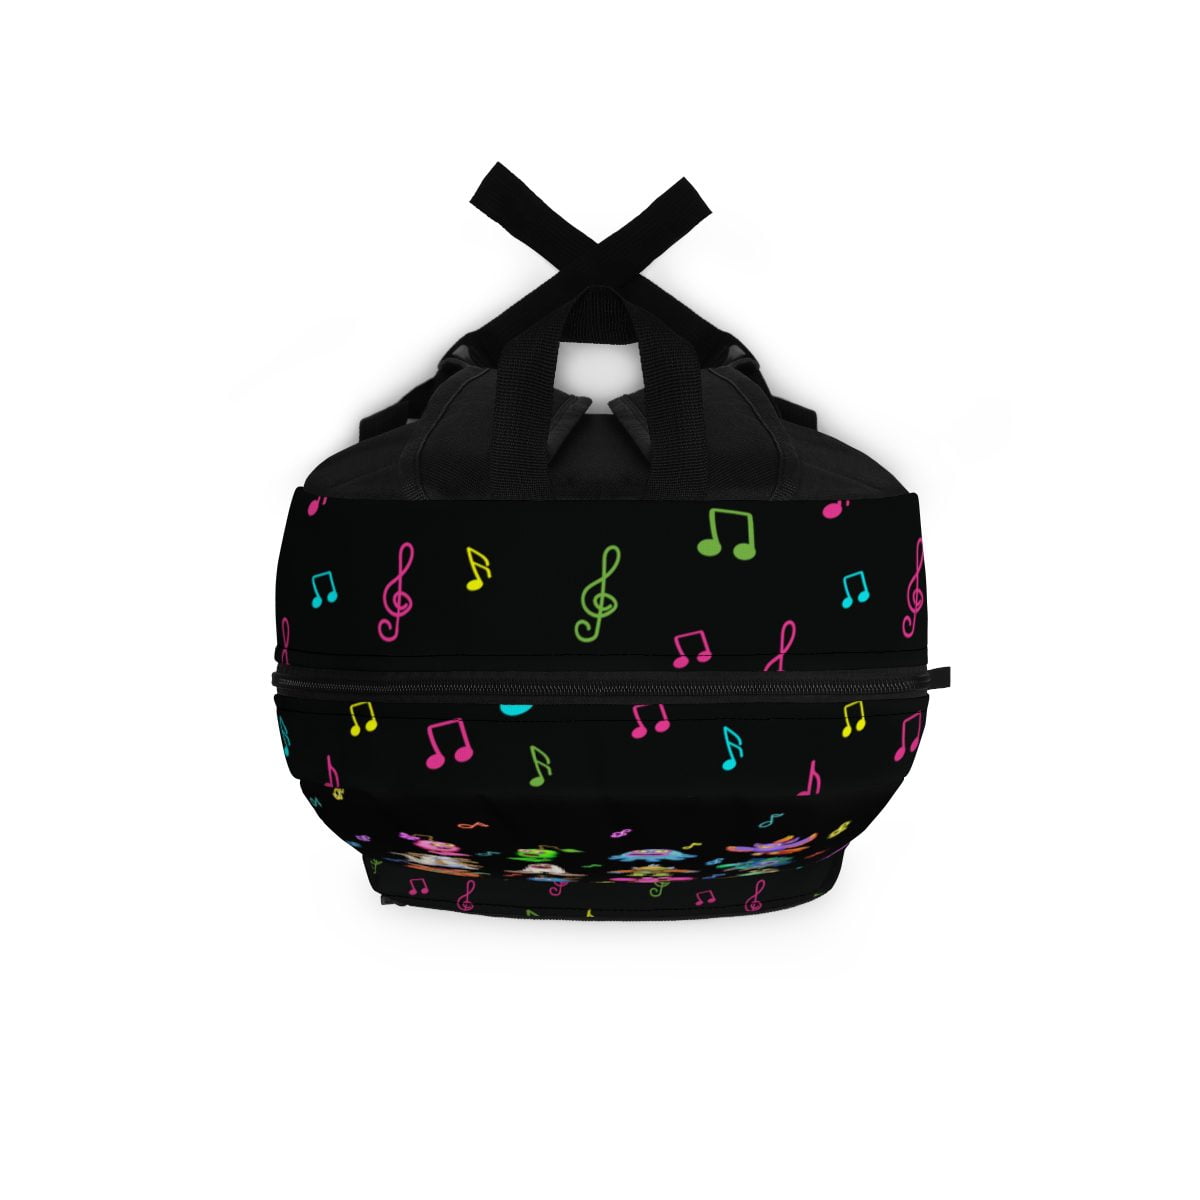 My Singing Monsters Backpack Funny and Colorful Characters Black Background Cool Kiddo 16